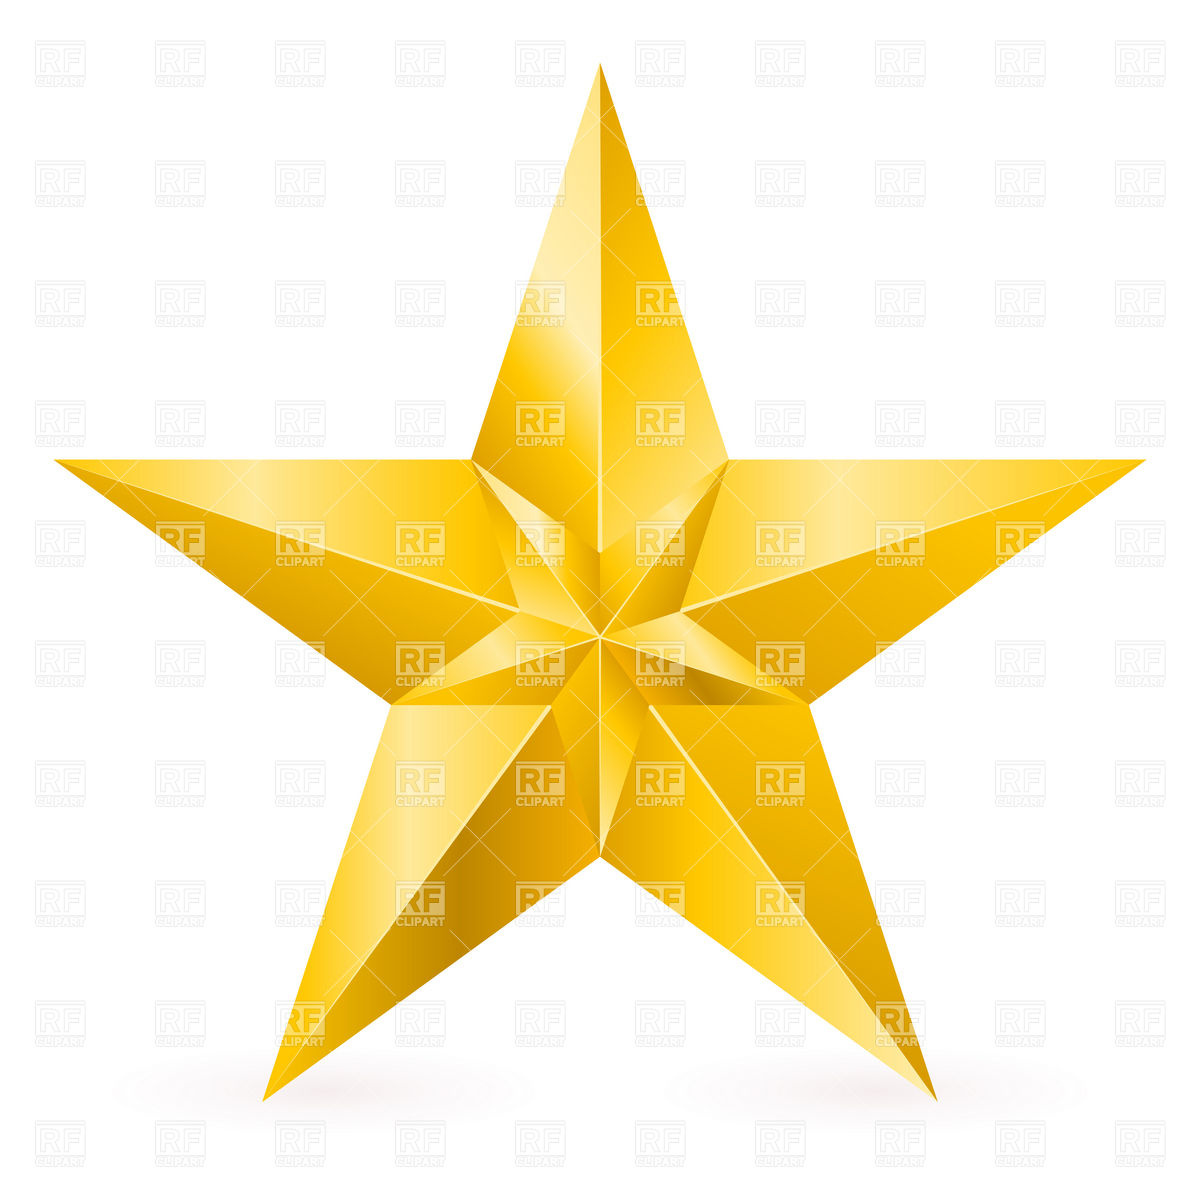 Star 8281 Design Elements Download Royalty Free Vector Clipart  Eps